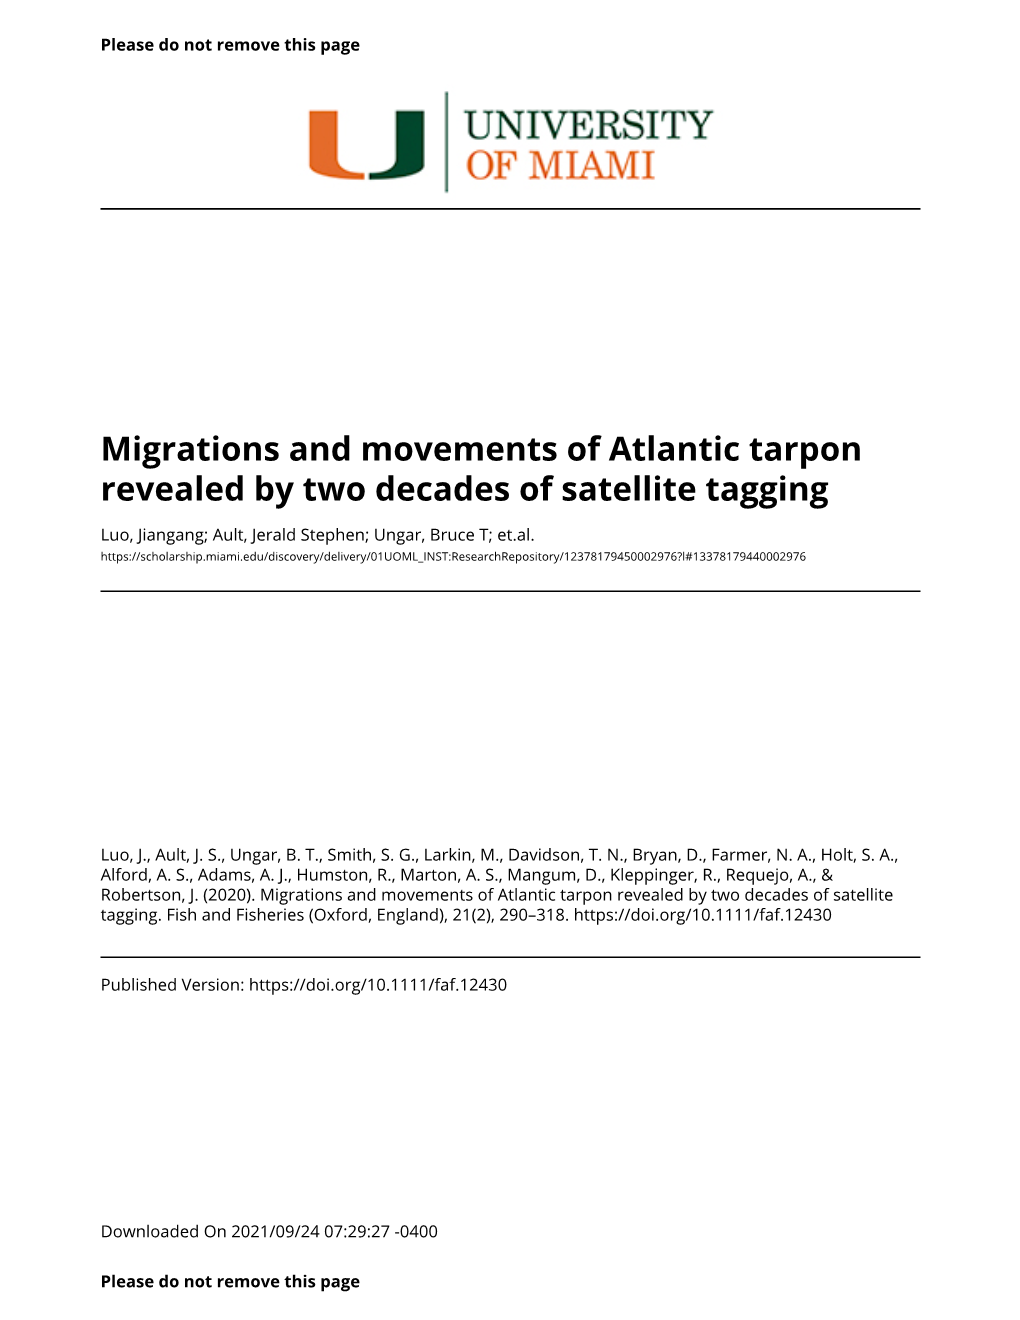 Migrations and Movements of Atlantic Tarpon Revealed by Two Decades of Satellite Tagging